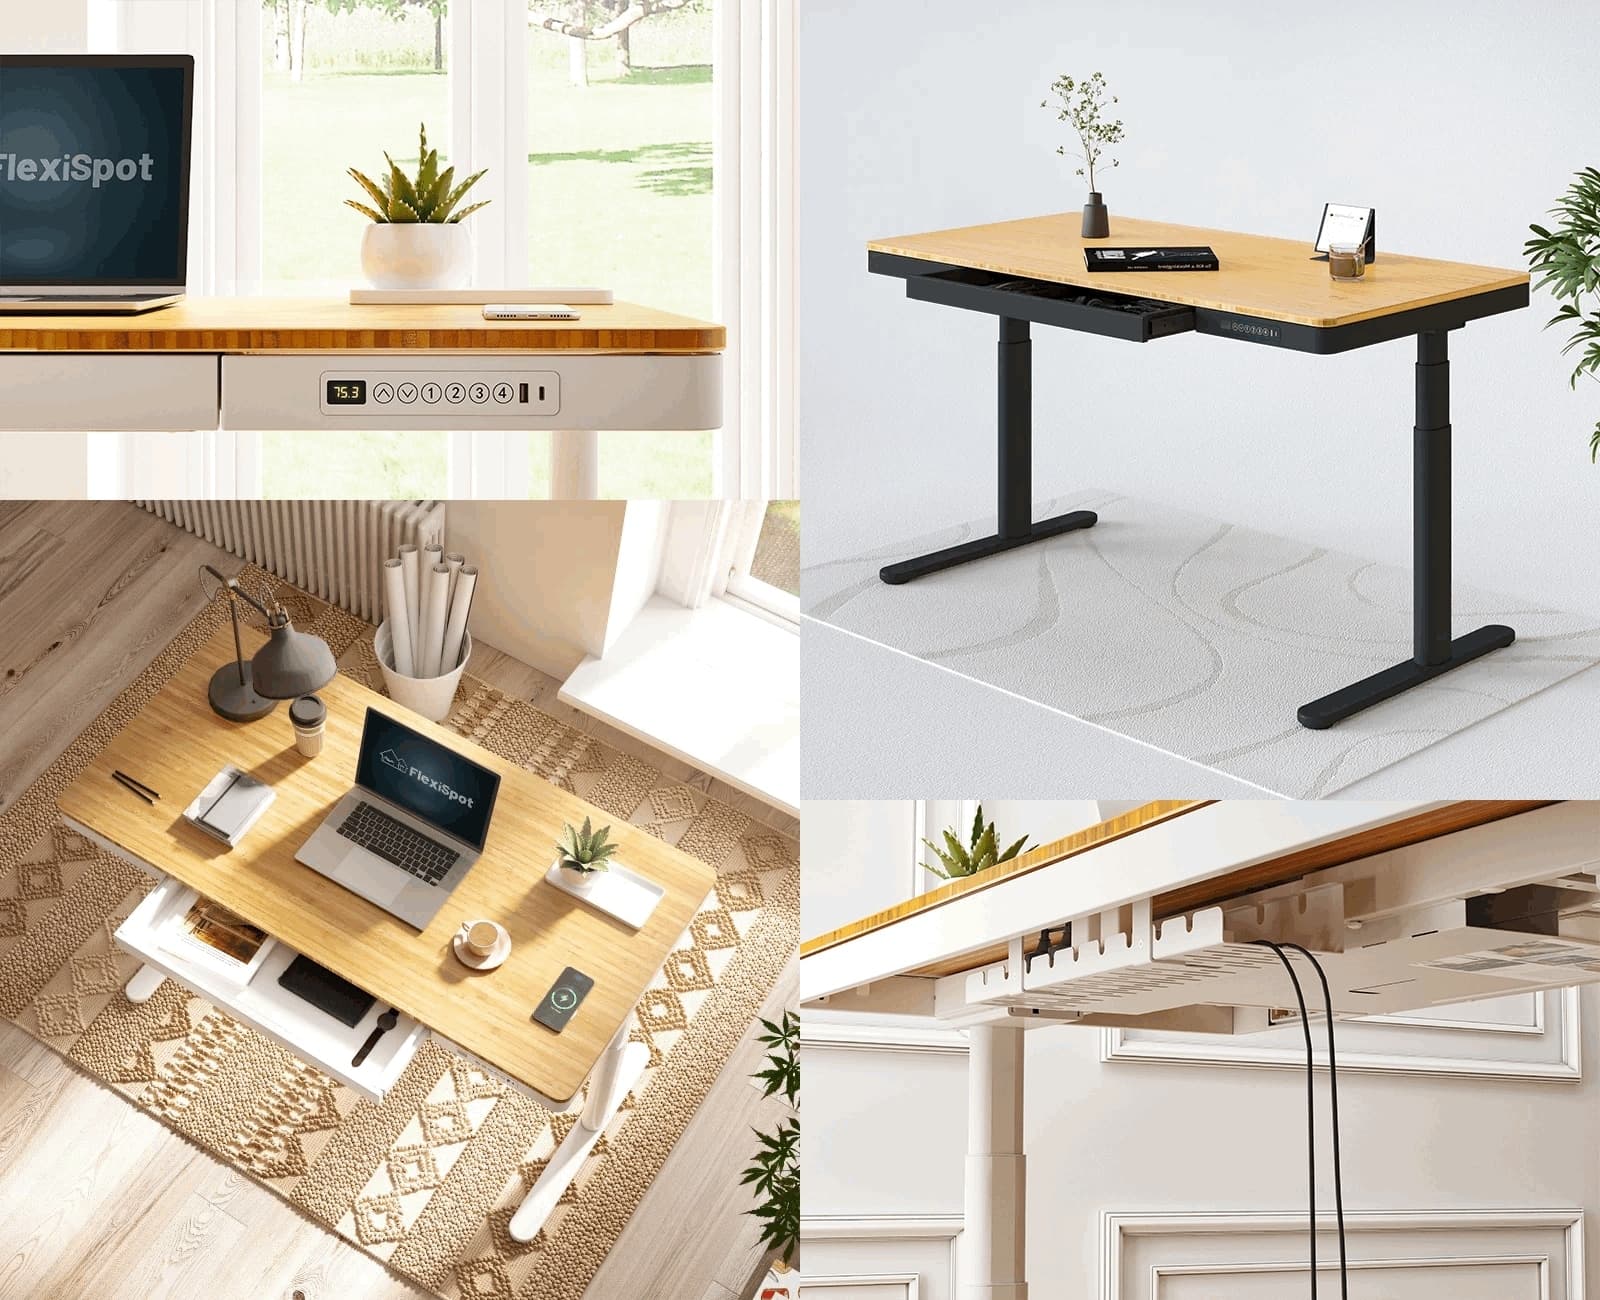 FlexiSpot standing desk with electronic height control.